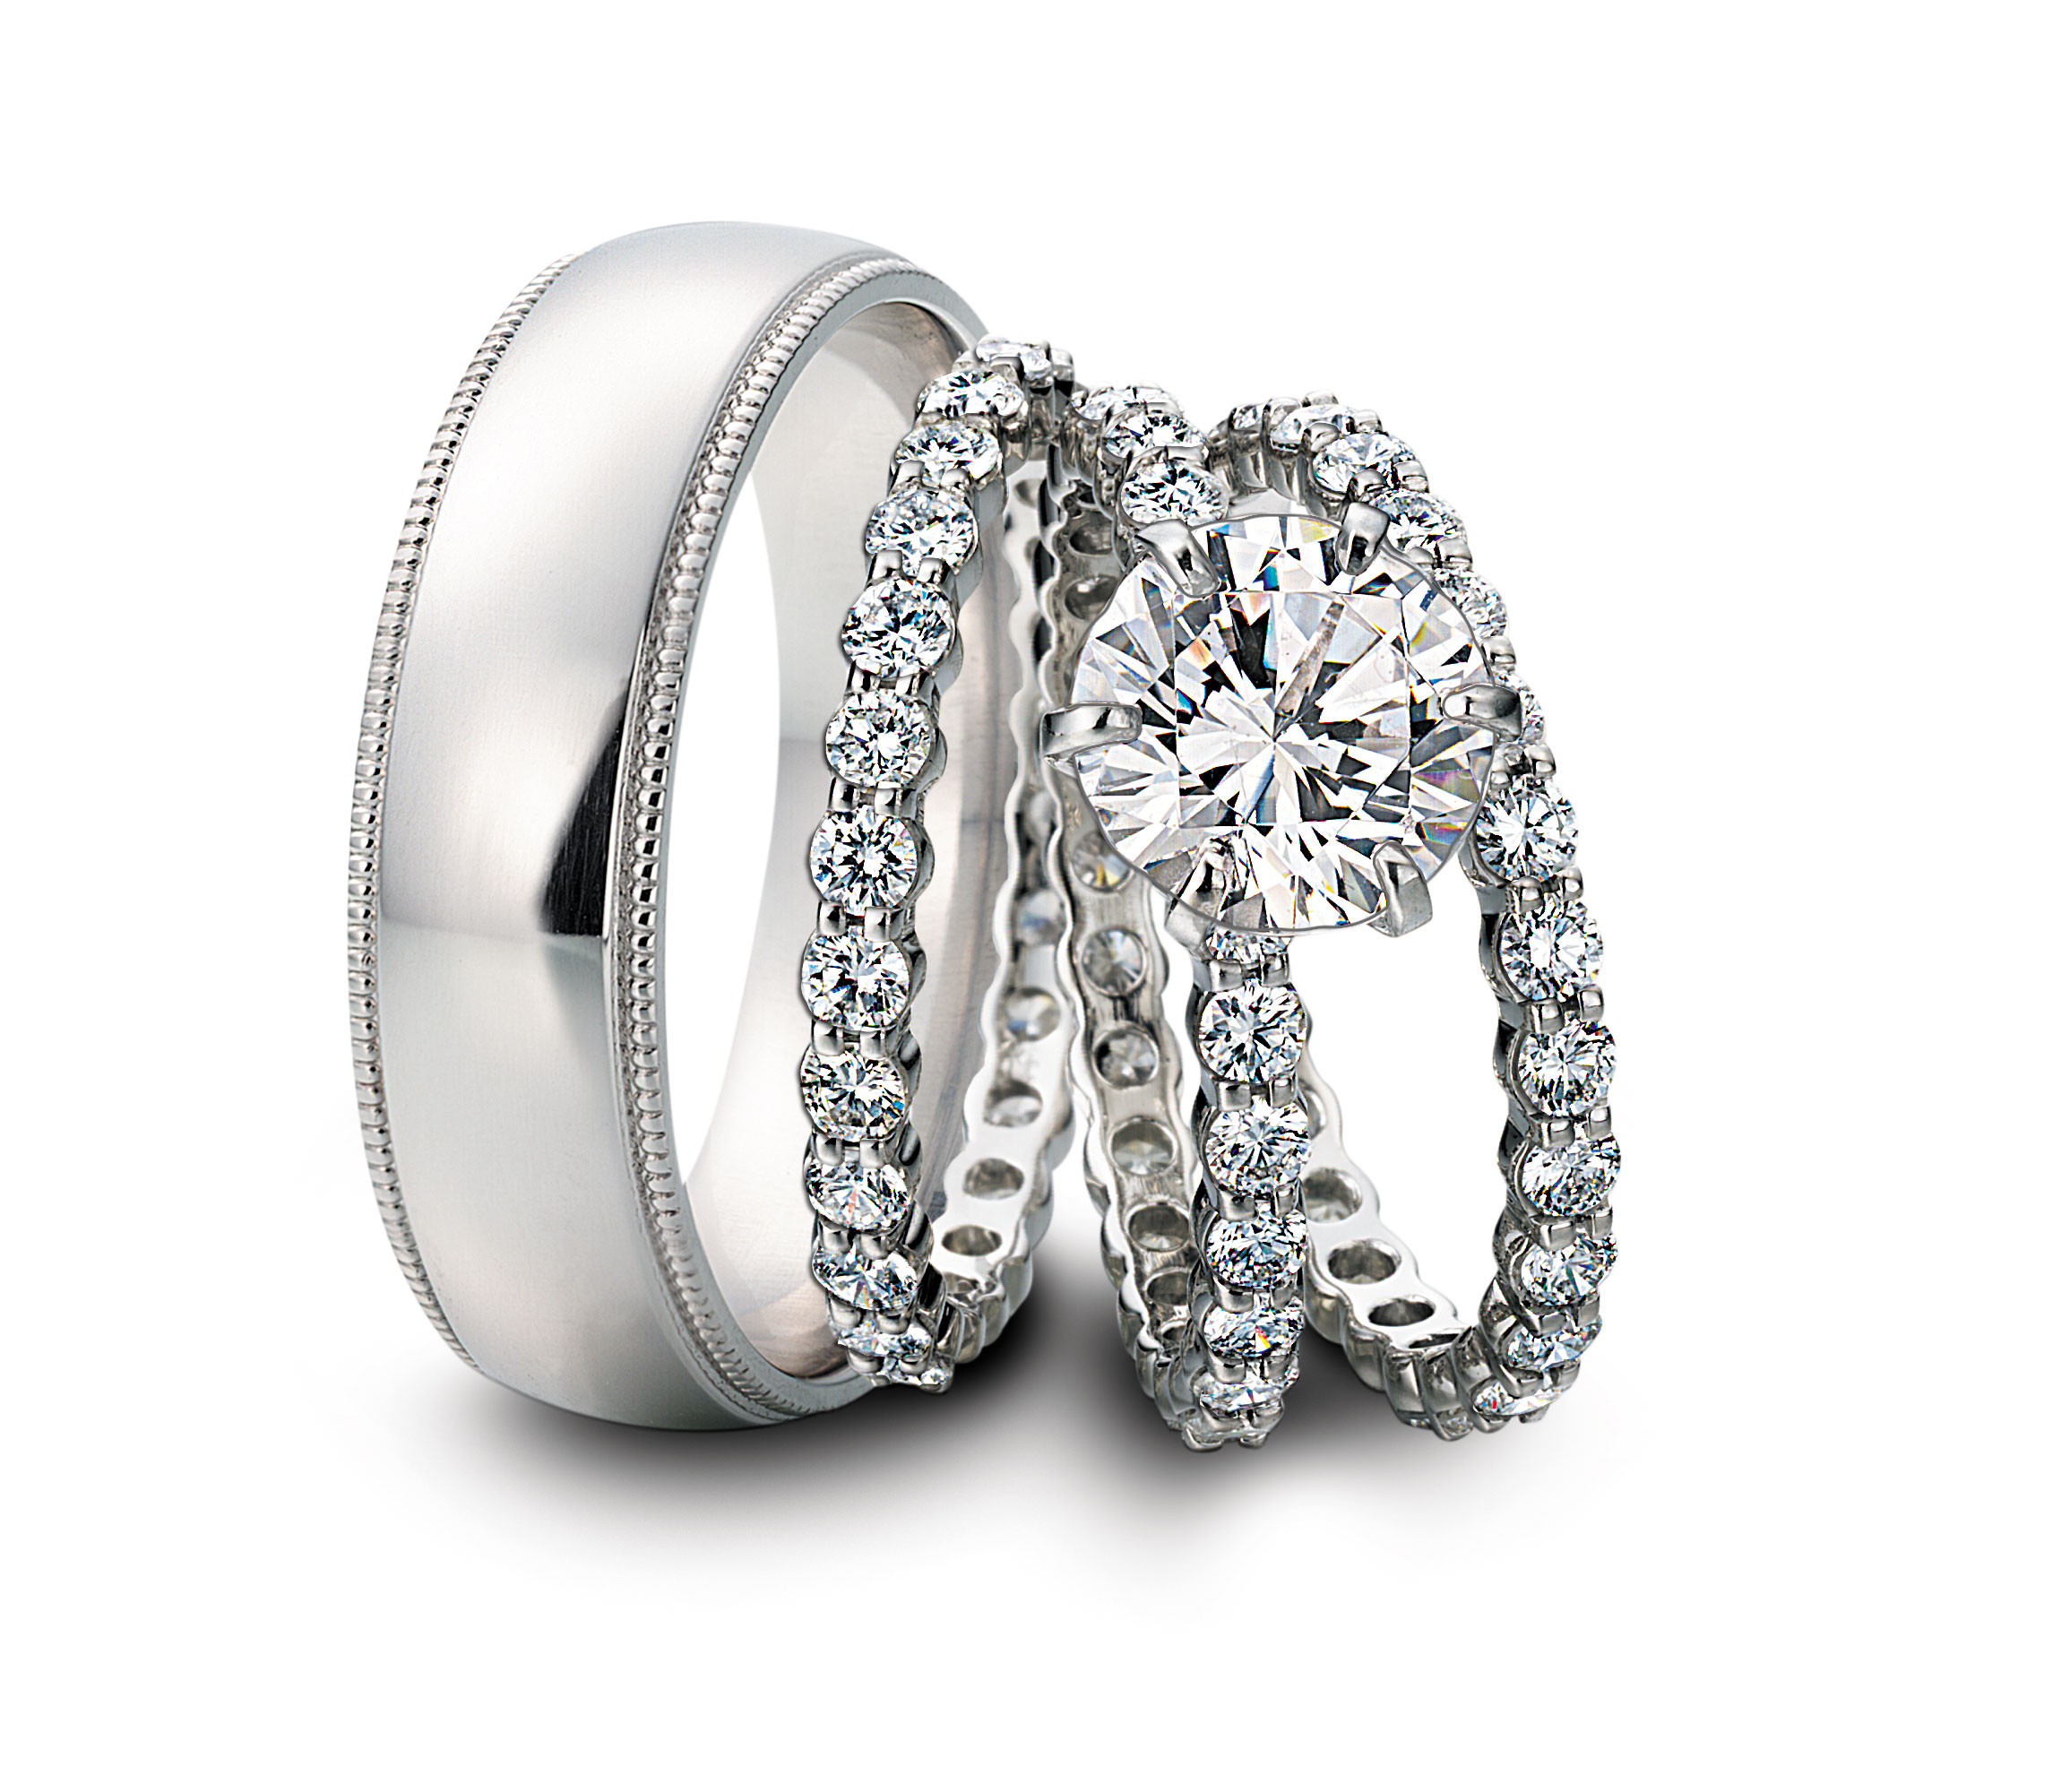 Wedding Rings His And Hers Matching Sets
 Should my wedding band be platinum or gold